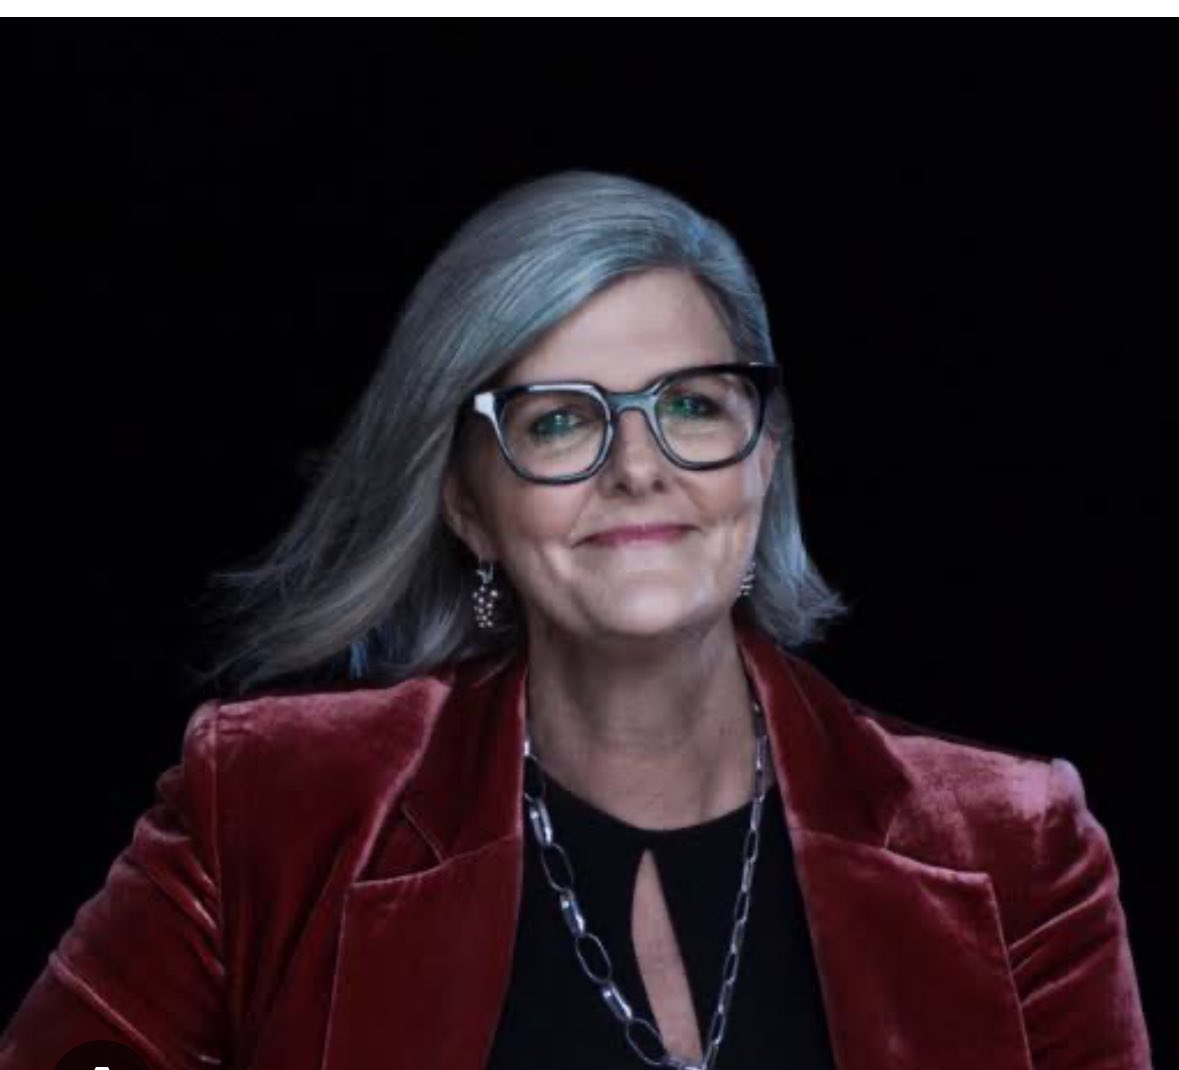 One of the most impressive professionals of her generation - with influence across listed boards, sport, climate change and women’s empowerment. Congrats Sam Mostyn - Australia’s next Governor General. A fine successor to General David Hurley who has been outstanding. #auspol